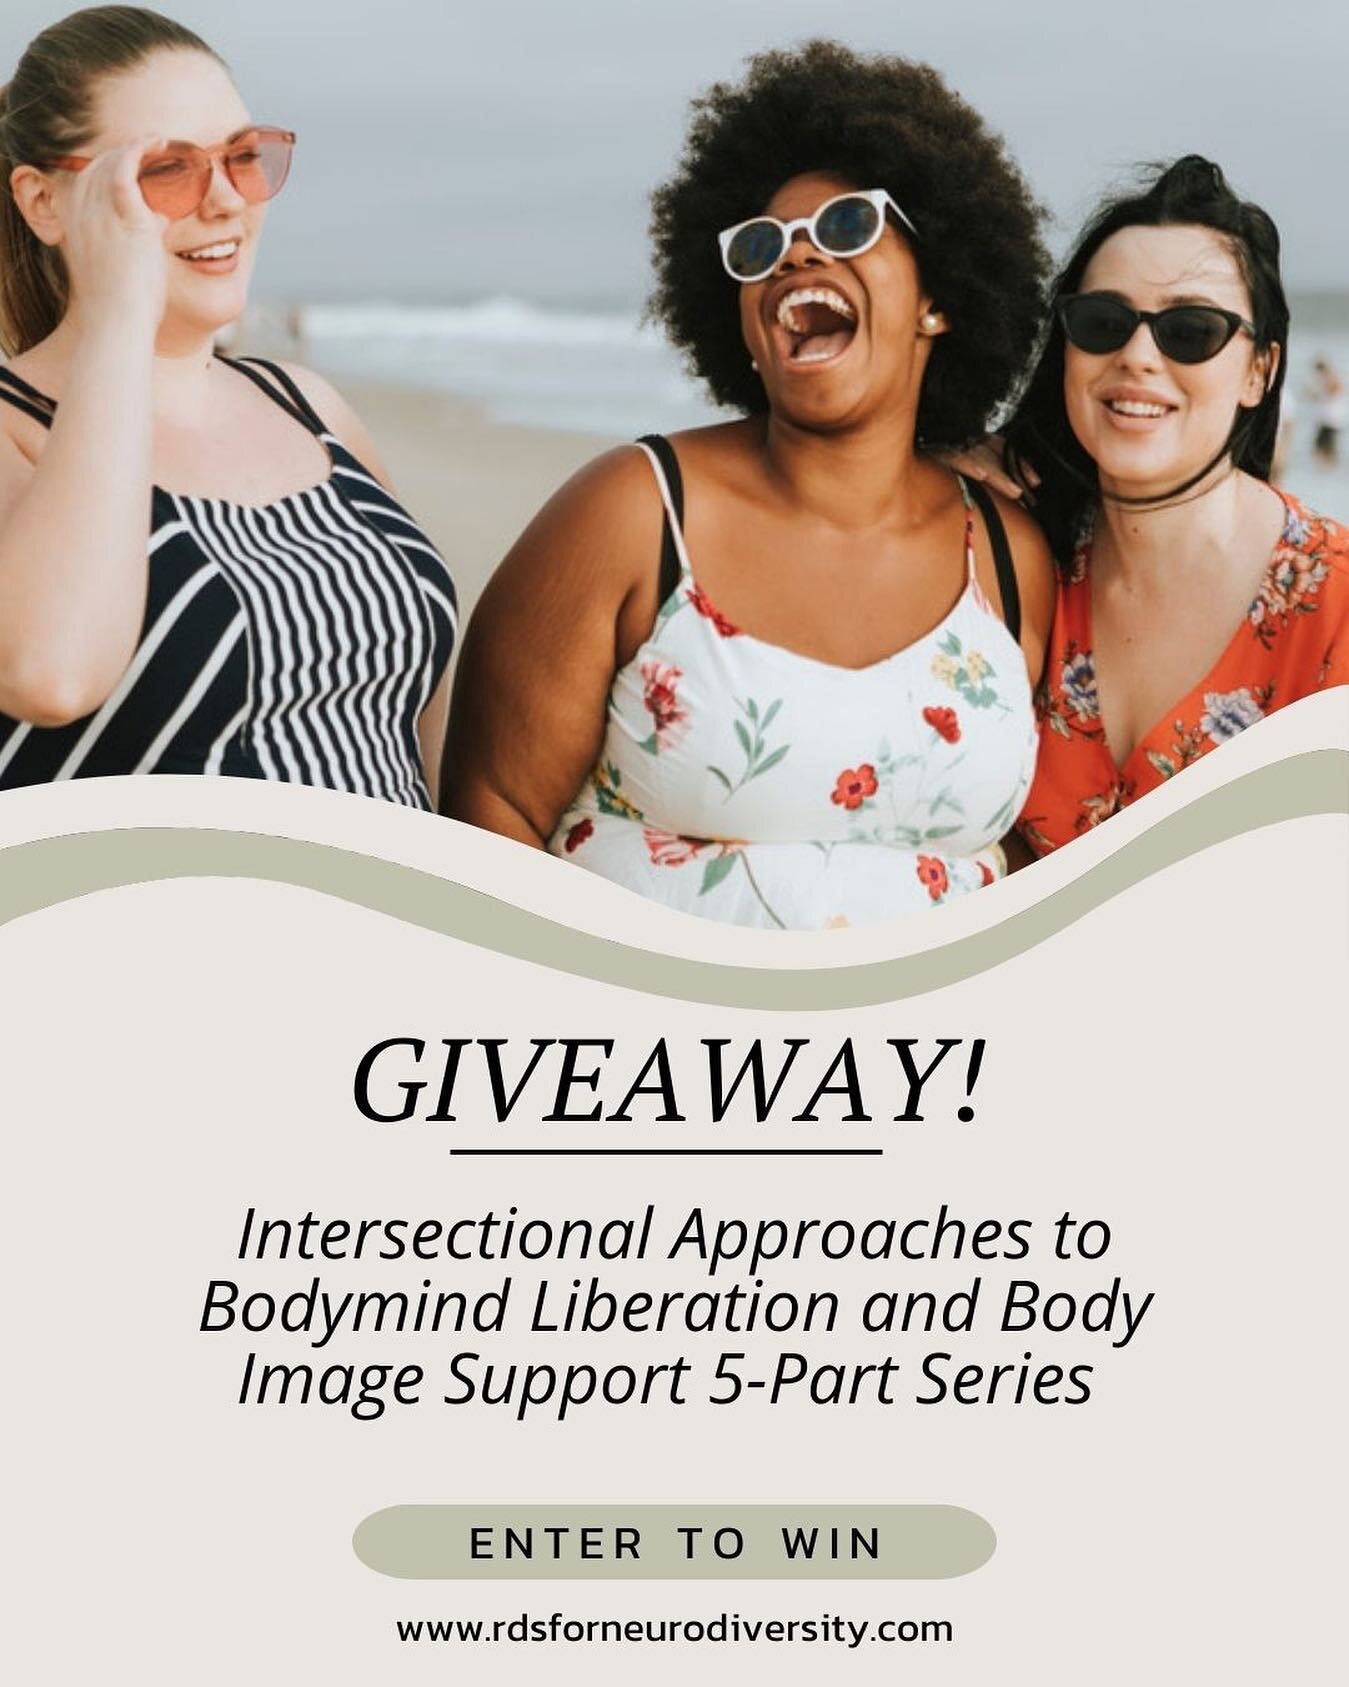 Giveaway Alert! 🎉🎉⁣
⁣
Follow these steps for a chance to win free admission to the Intersectional Approaches to Bodymind Liberation and Body Image Support Series. ⁣
⁣
Check out the link in the bio for info on the speakers and the presentations. ⁣
⁣